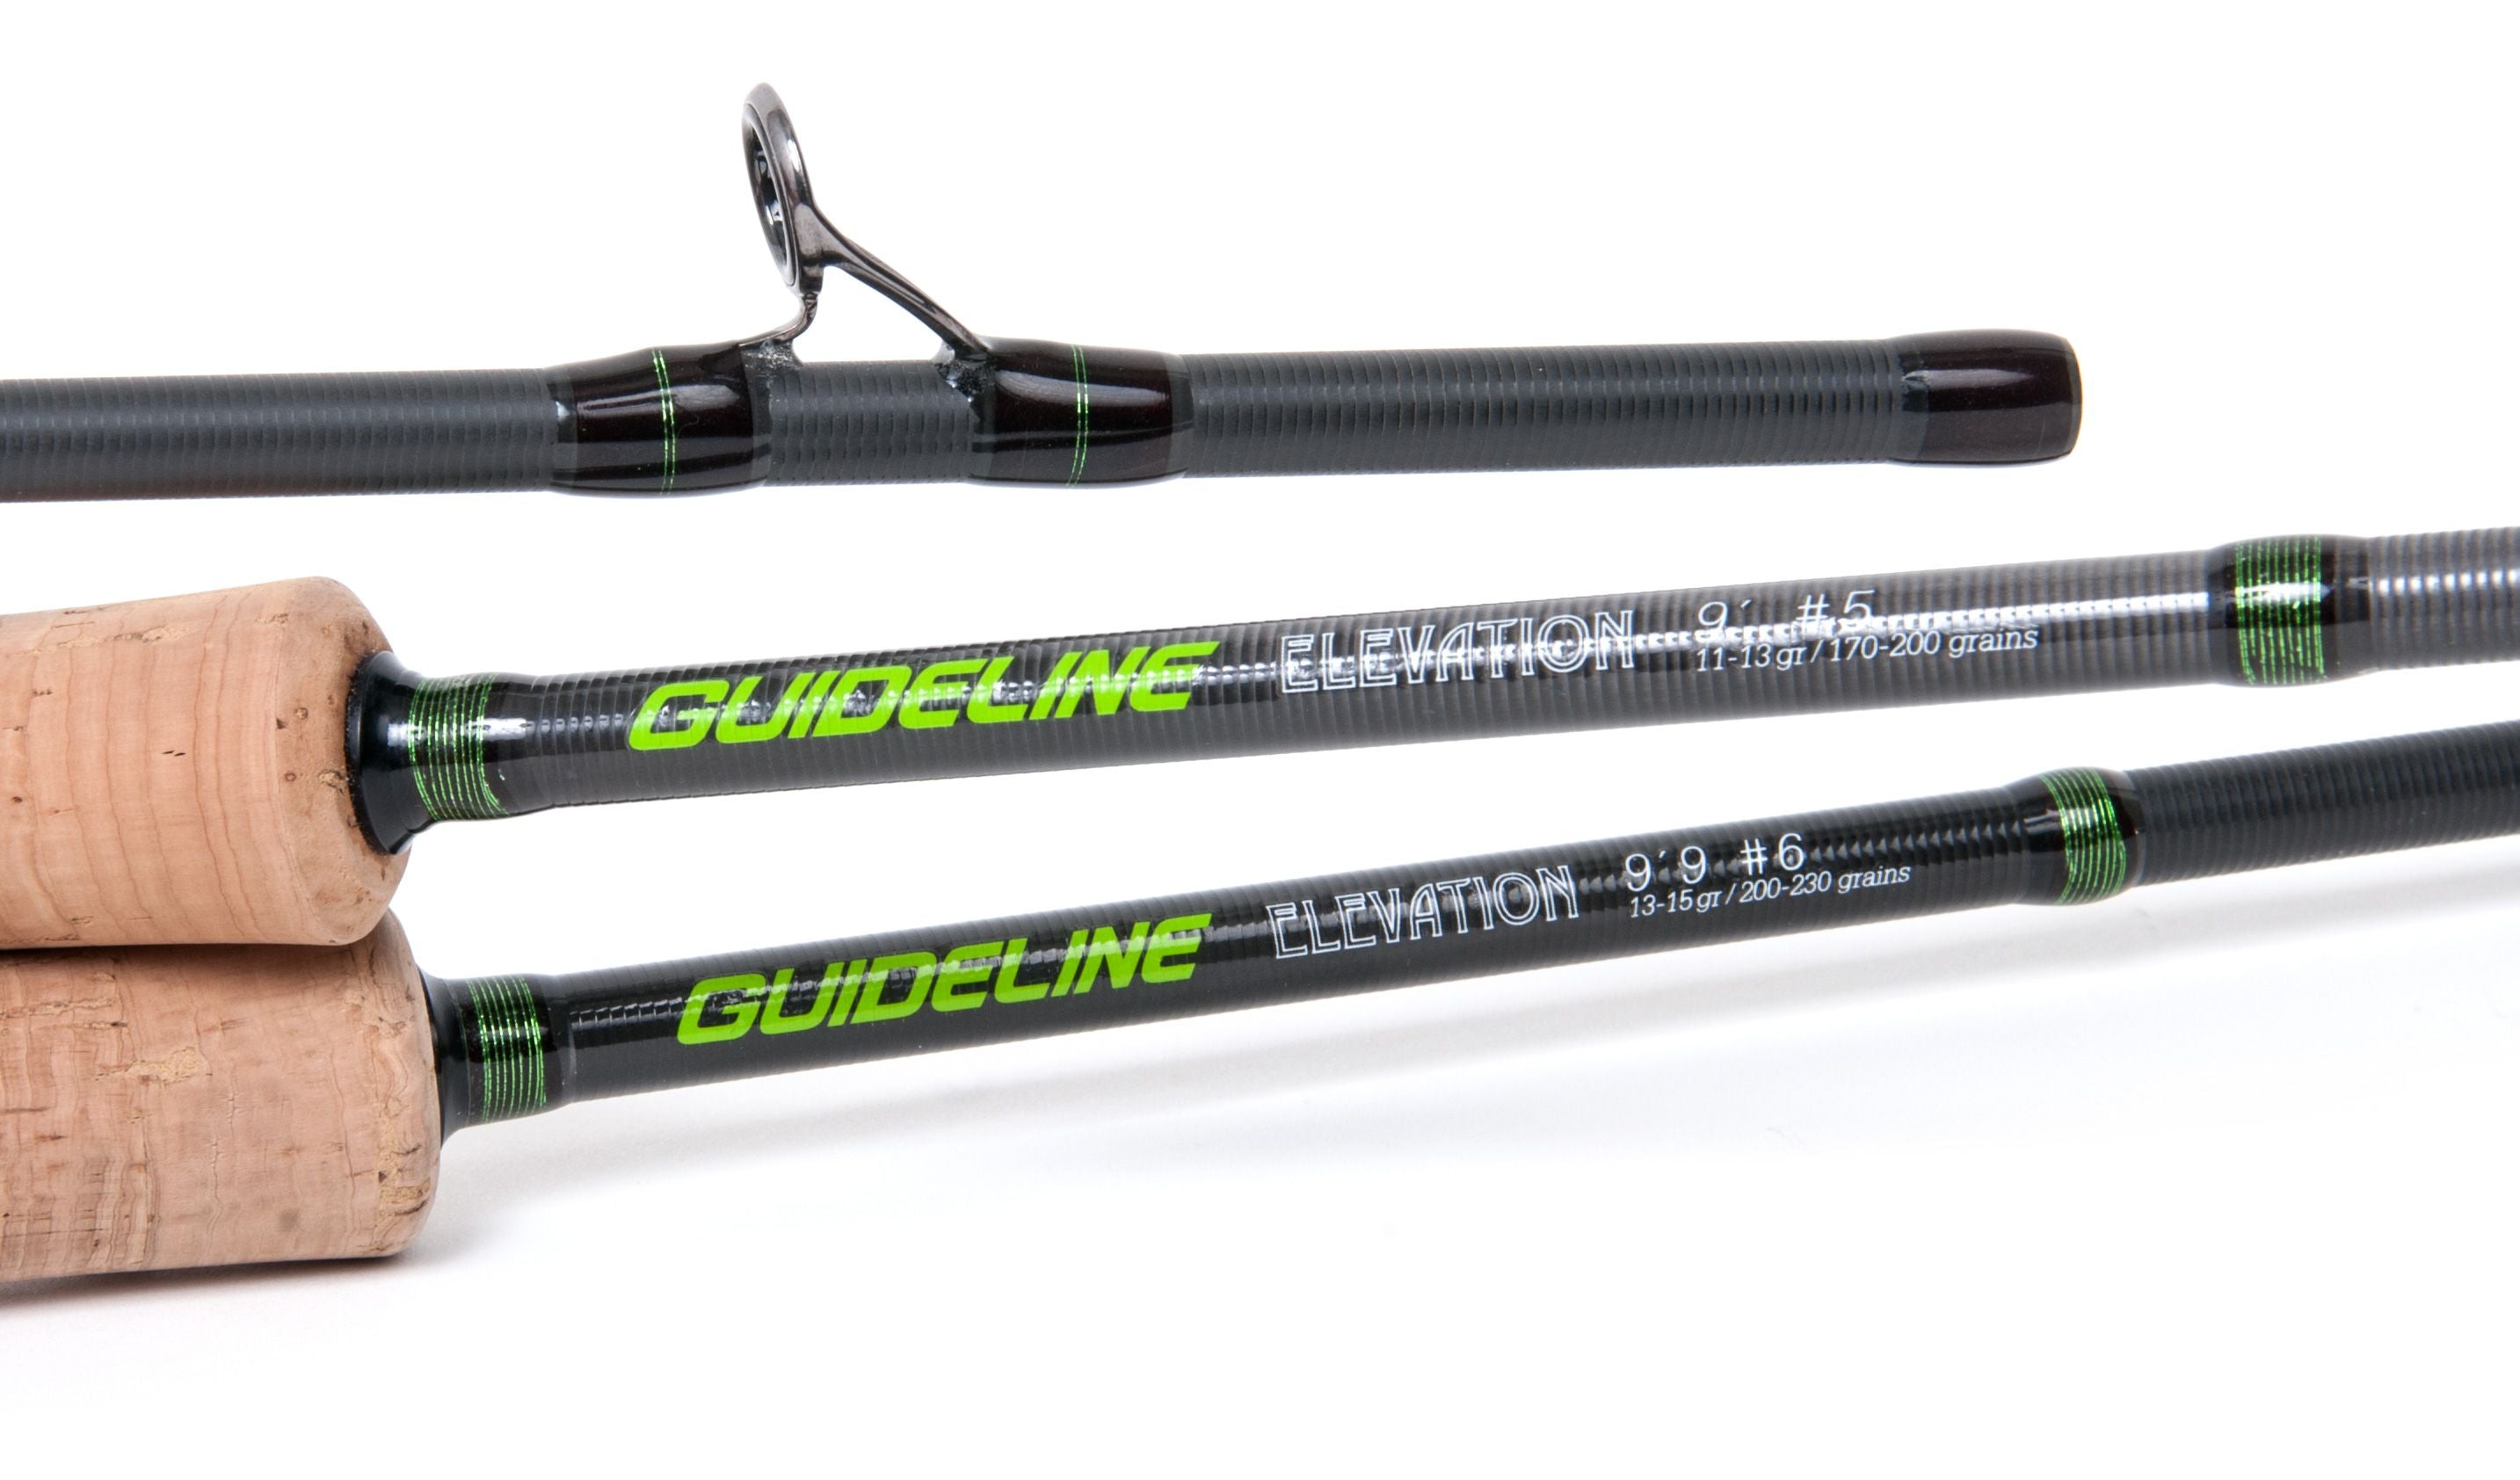 GUIDELINE ELEVATION SH 4PCE FLY RODS -  25% OFF!